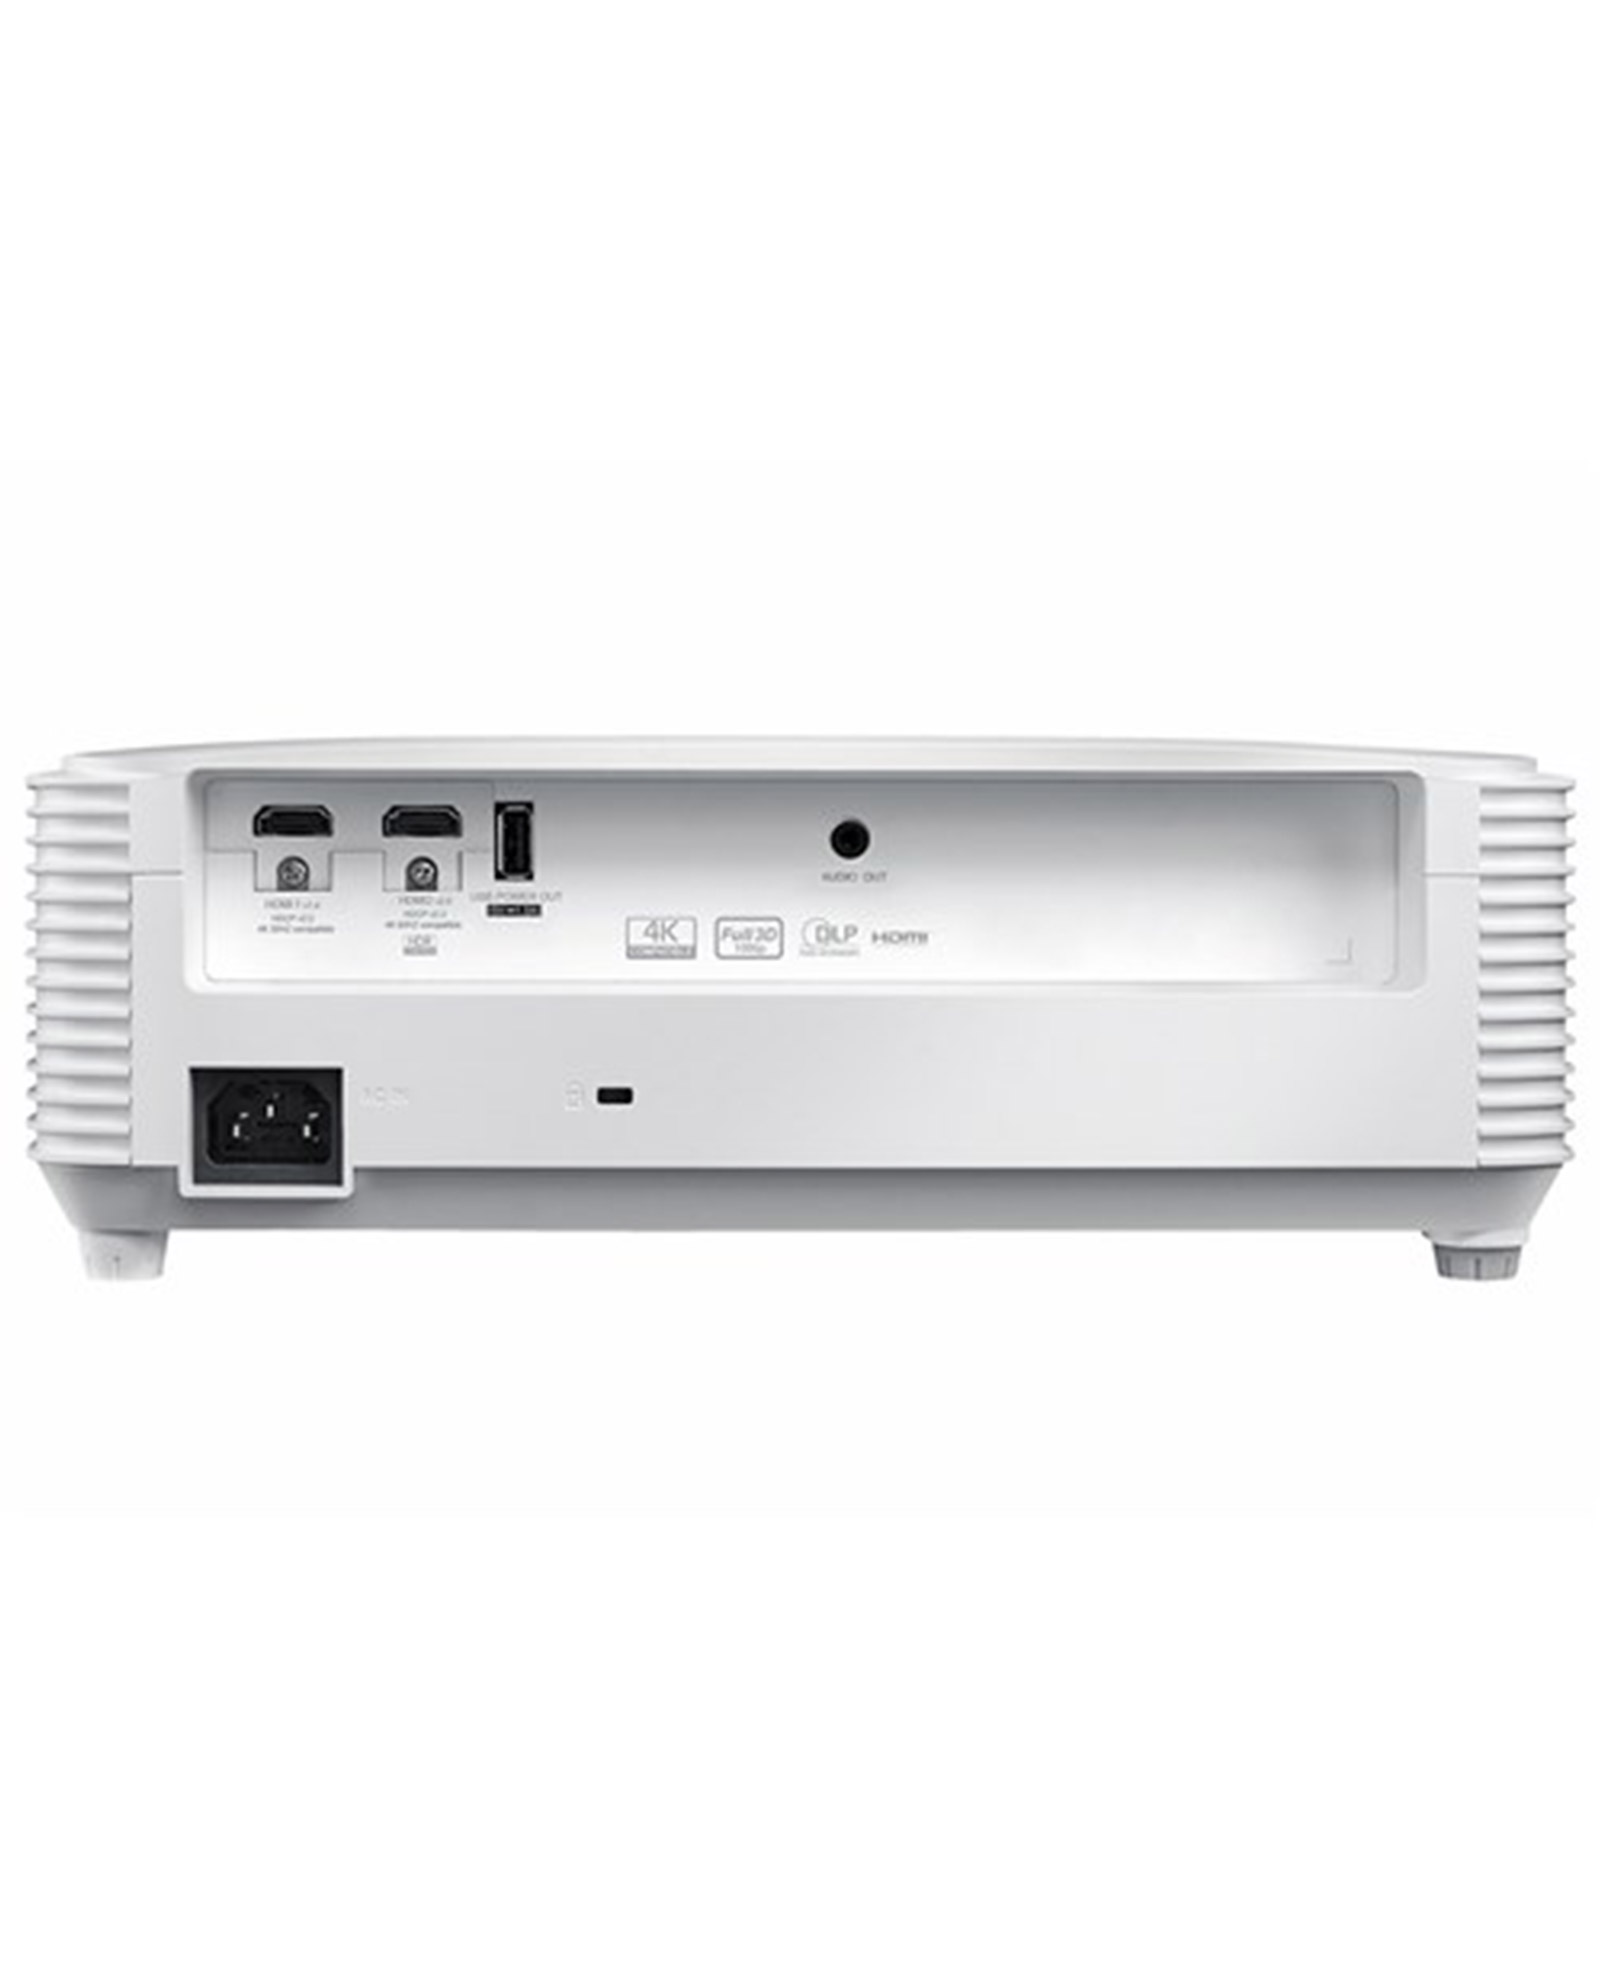 Optoma Hd30hdr 3800lm 1080p 50000 1 Home Theatre Projector 1